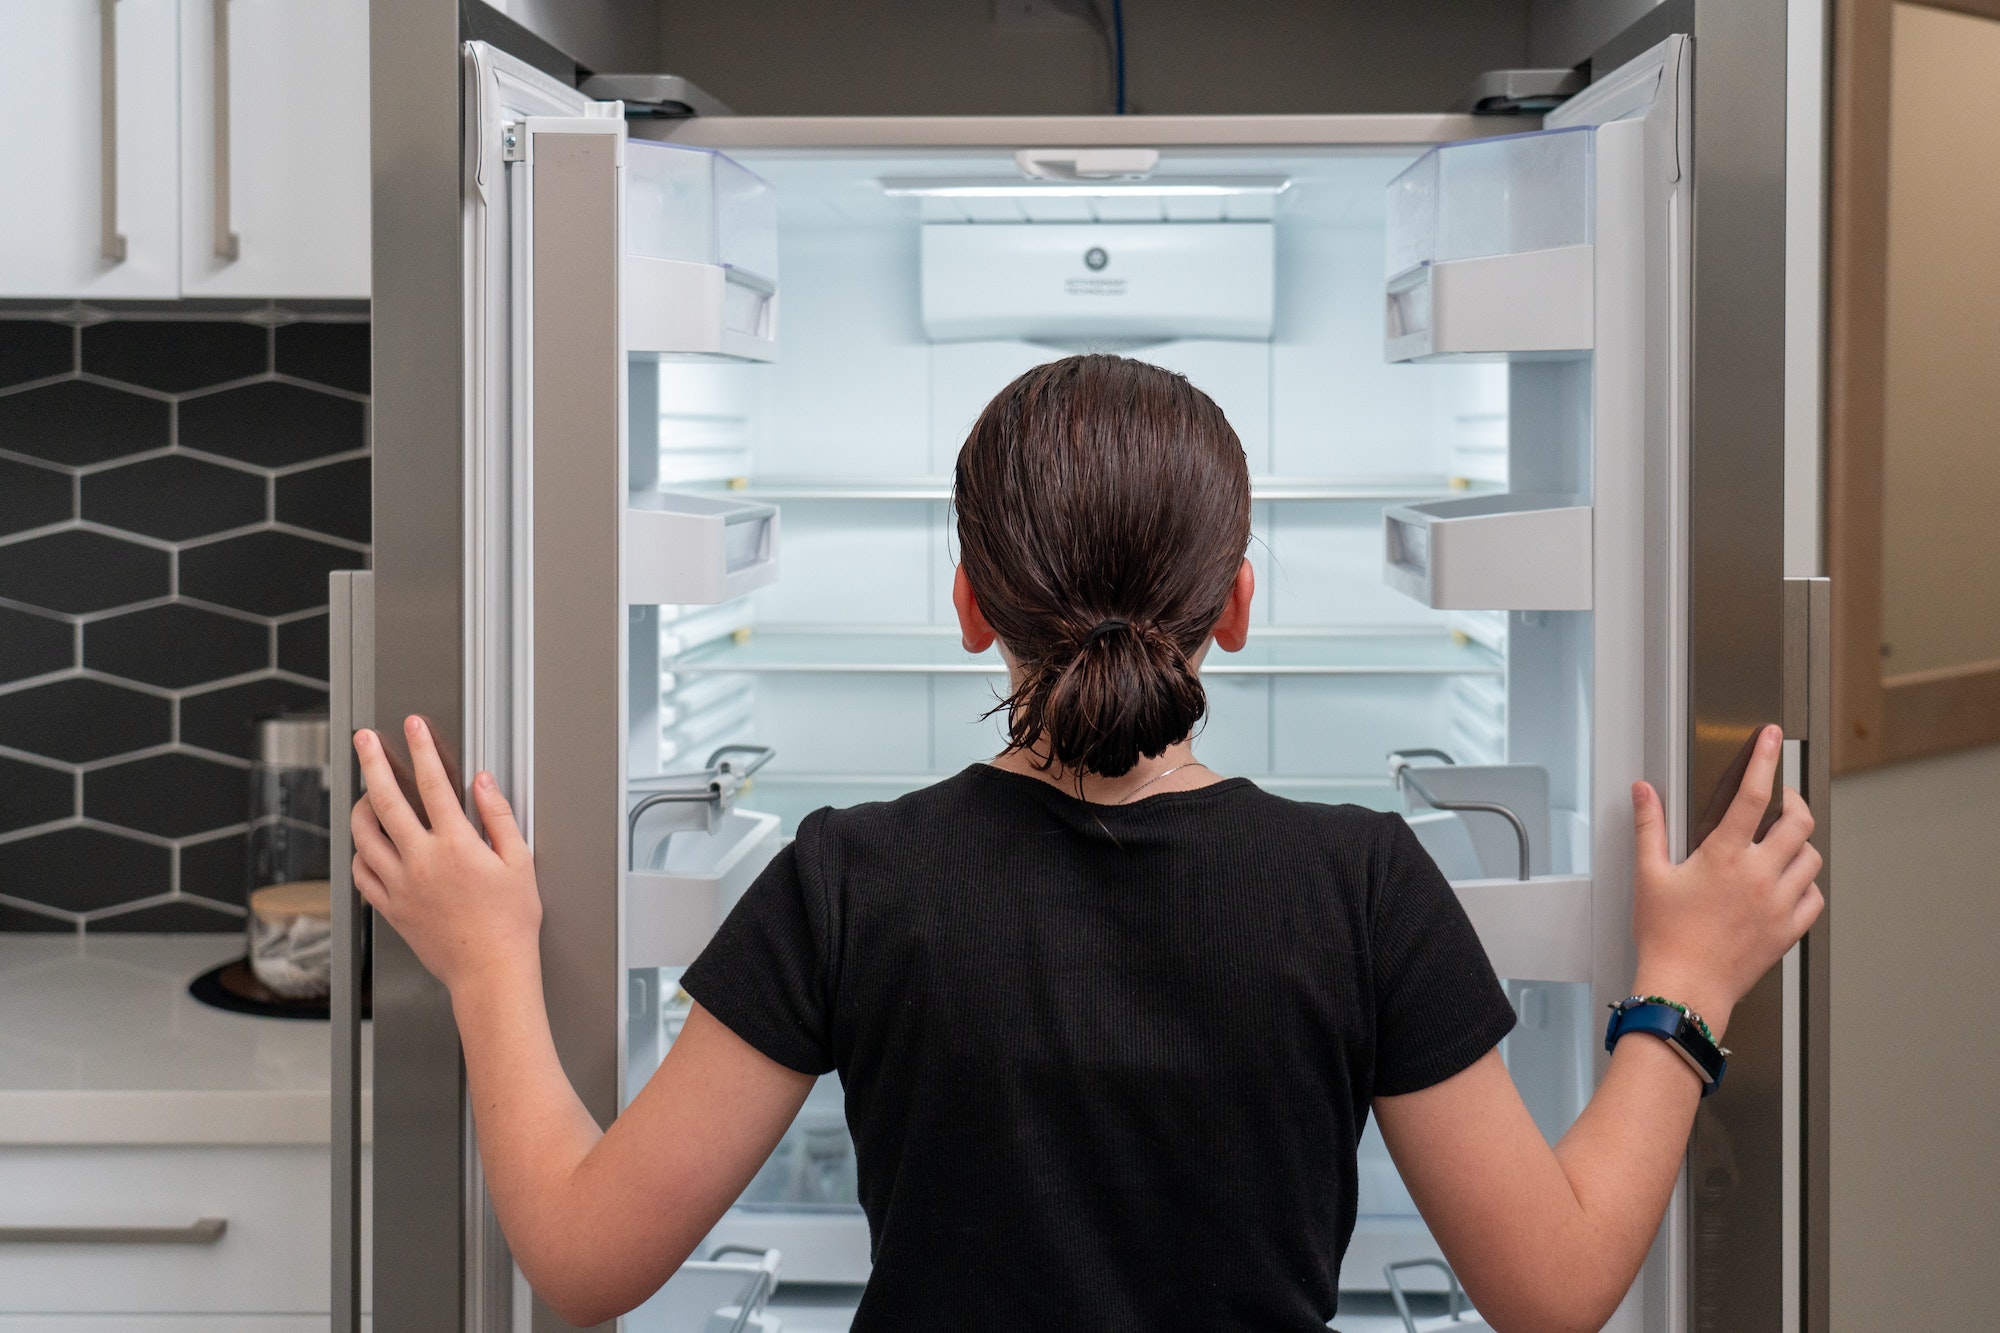 young girl looking into an empty Refrigerator fridge, Looking into empty fridge concept